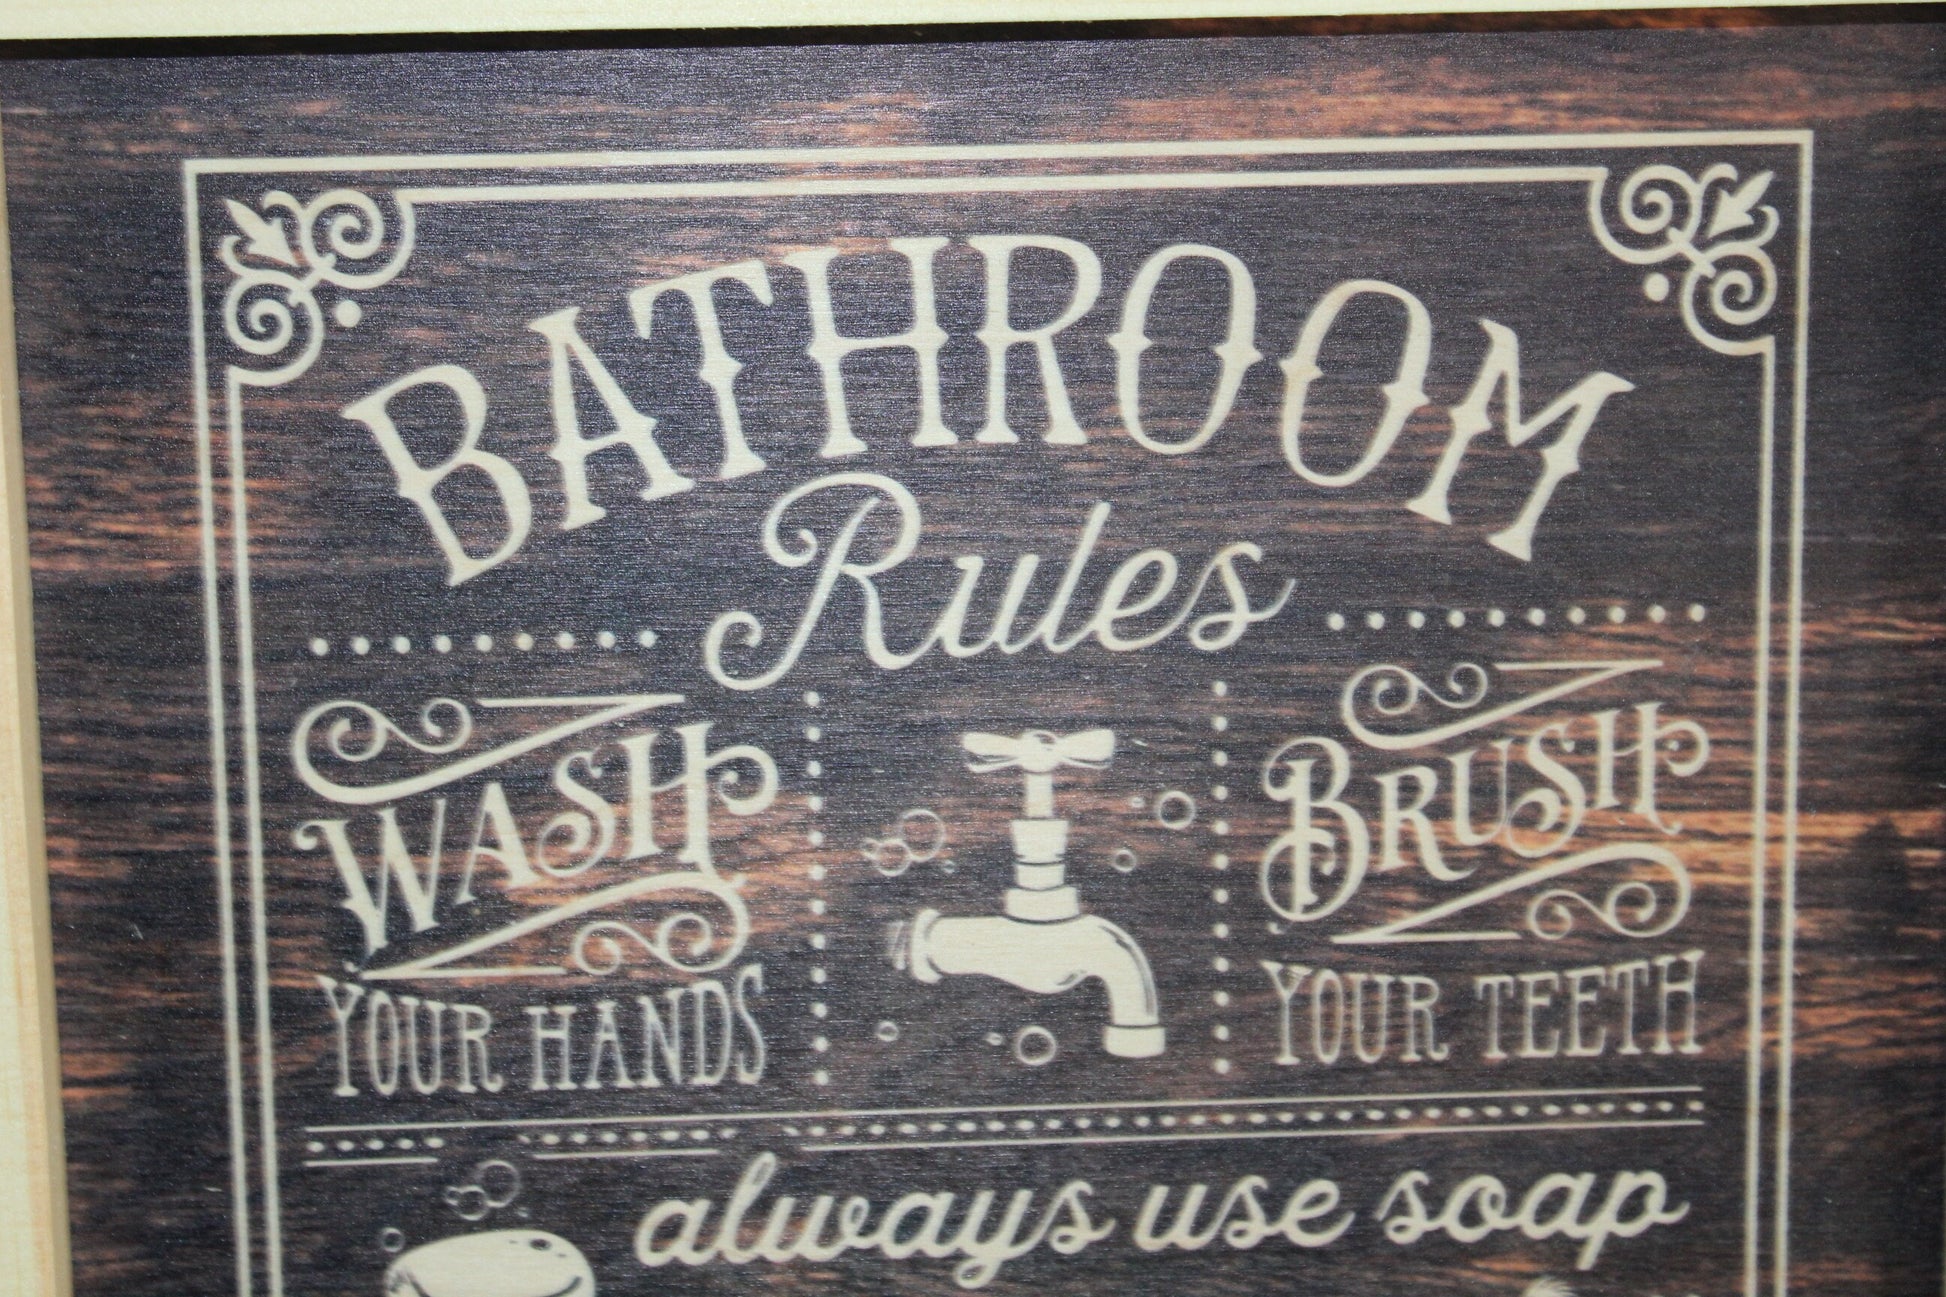 Bathroom Rules Wall Sign Wood Funny Rustic Wash Brush Tidy Change the Paper Put the Lid Down List Framed Hanging Decoration Decor Art